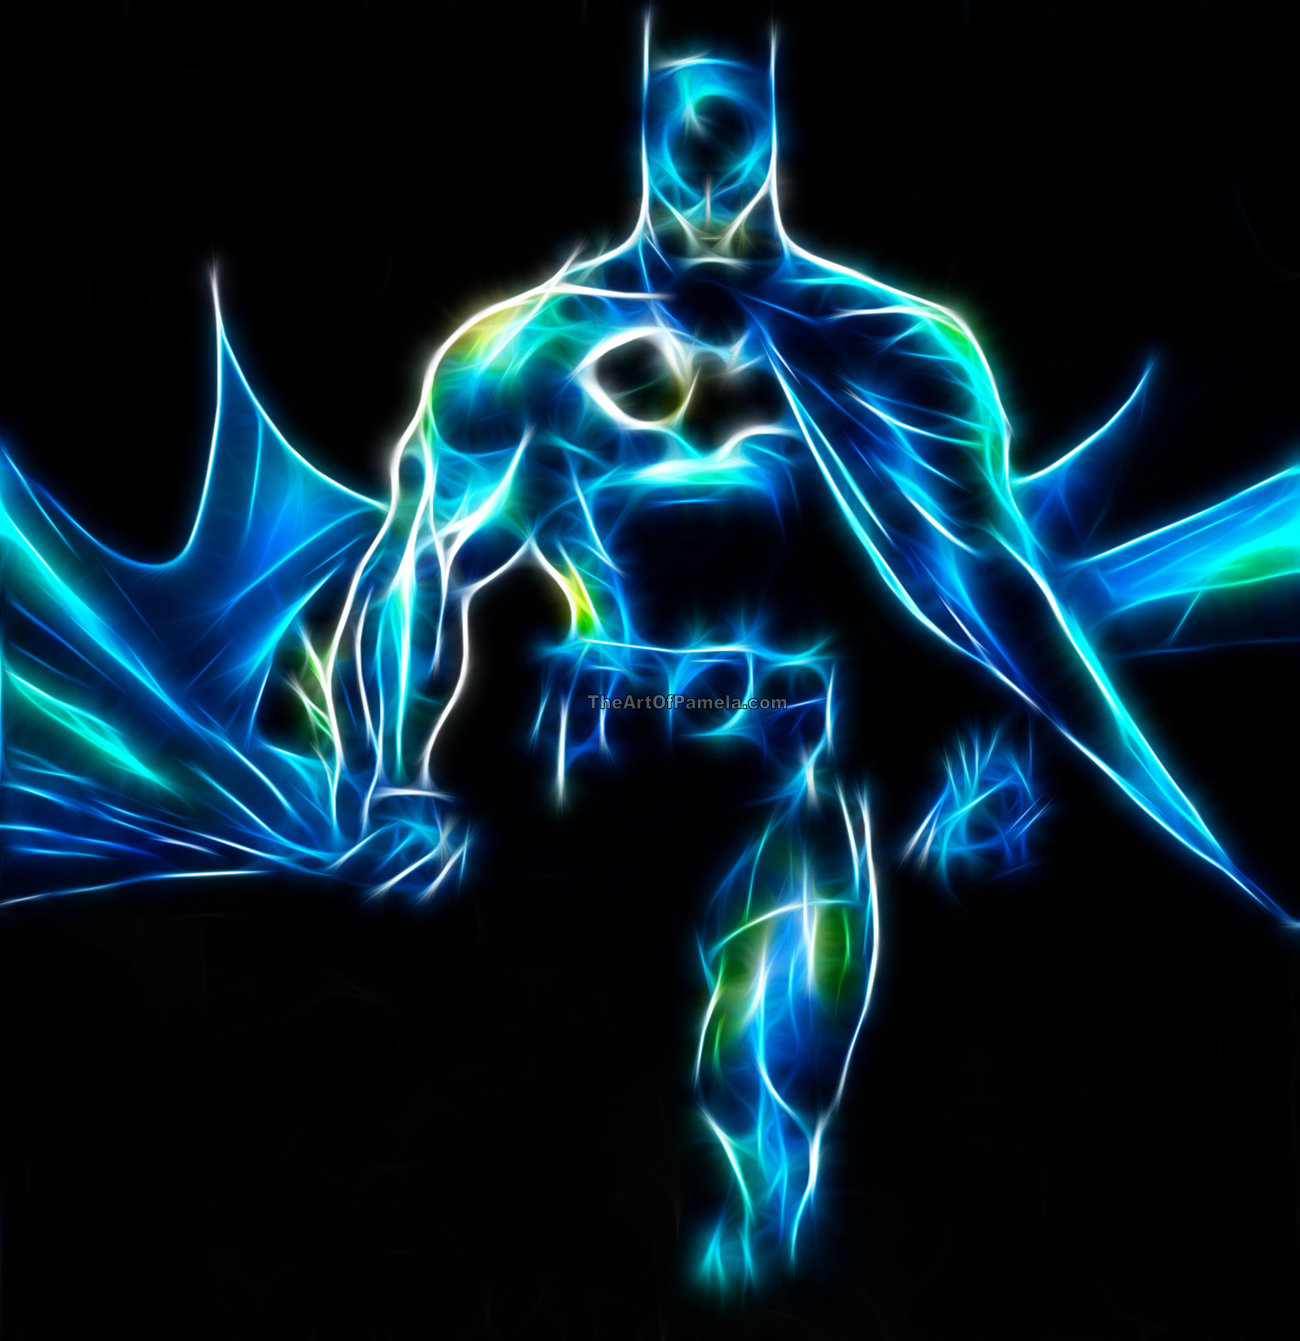 really cool batman pictures